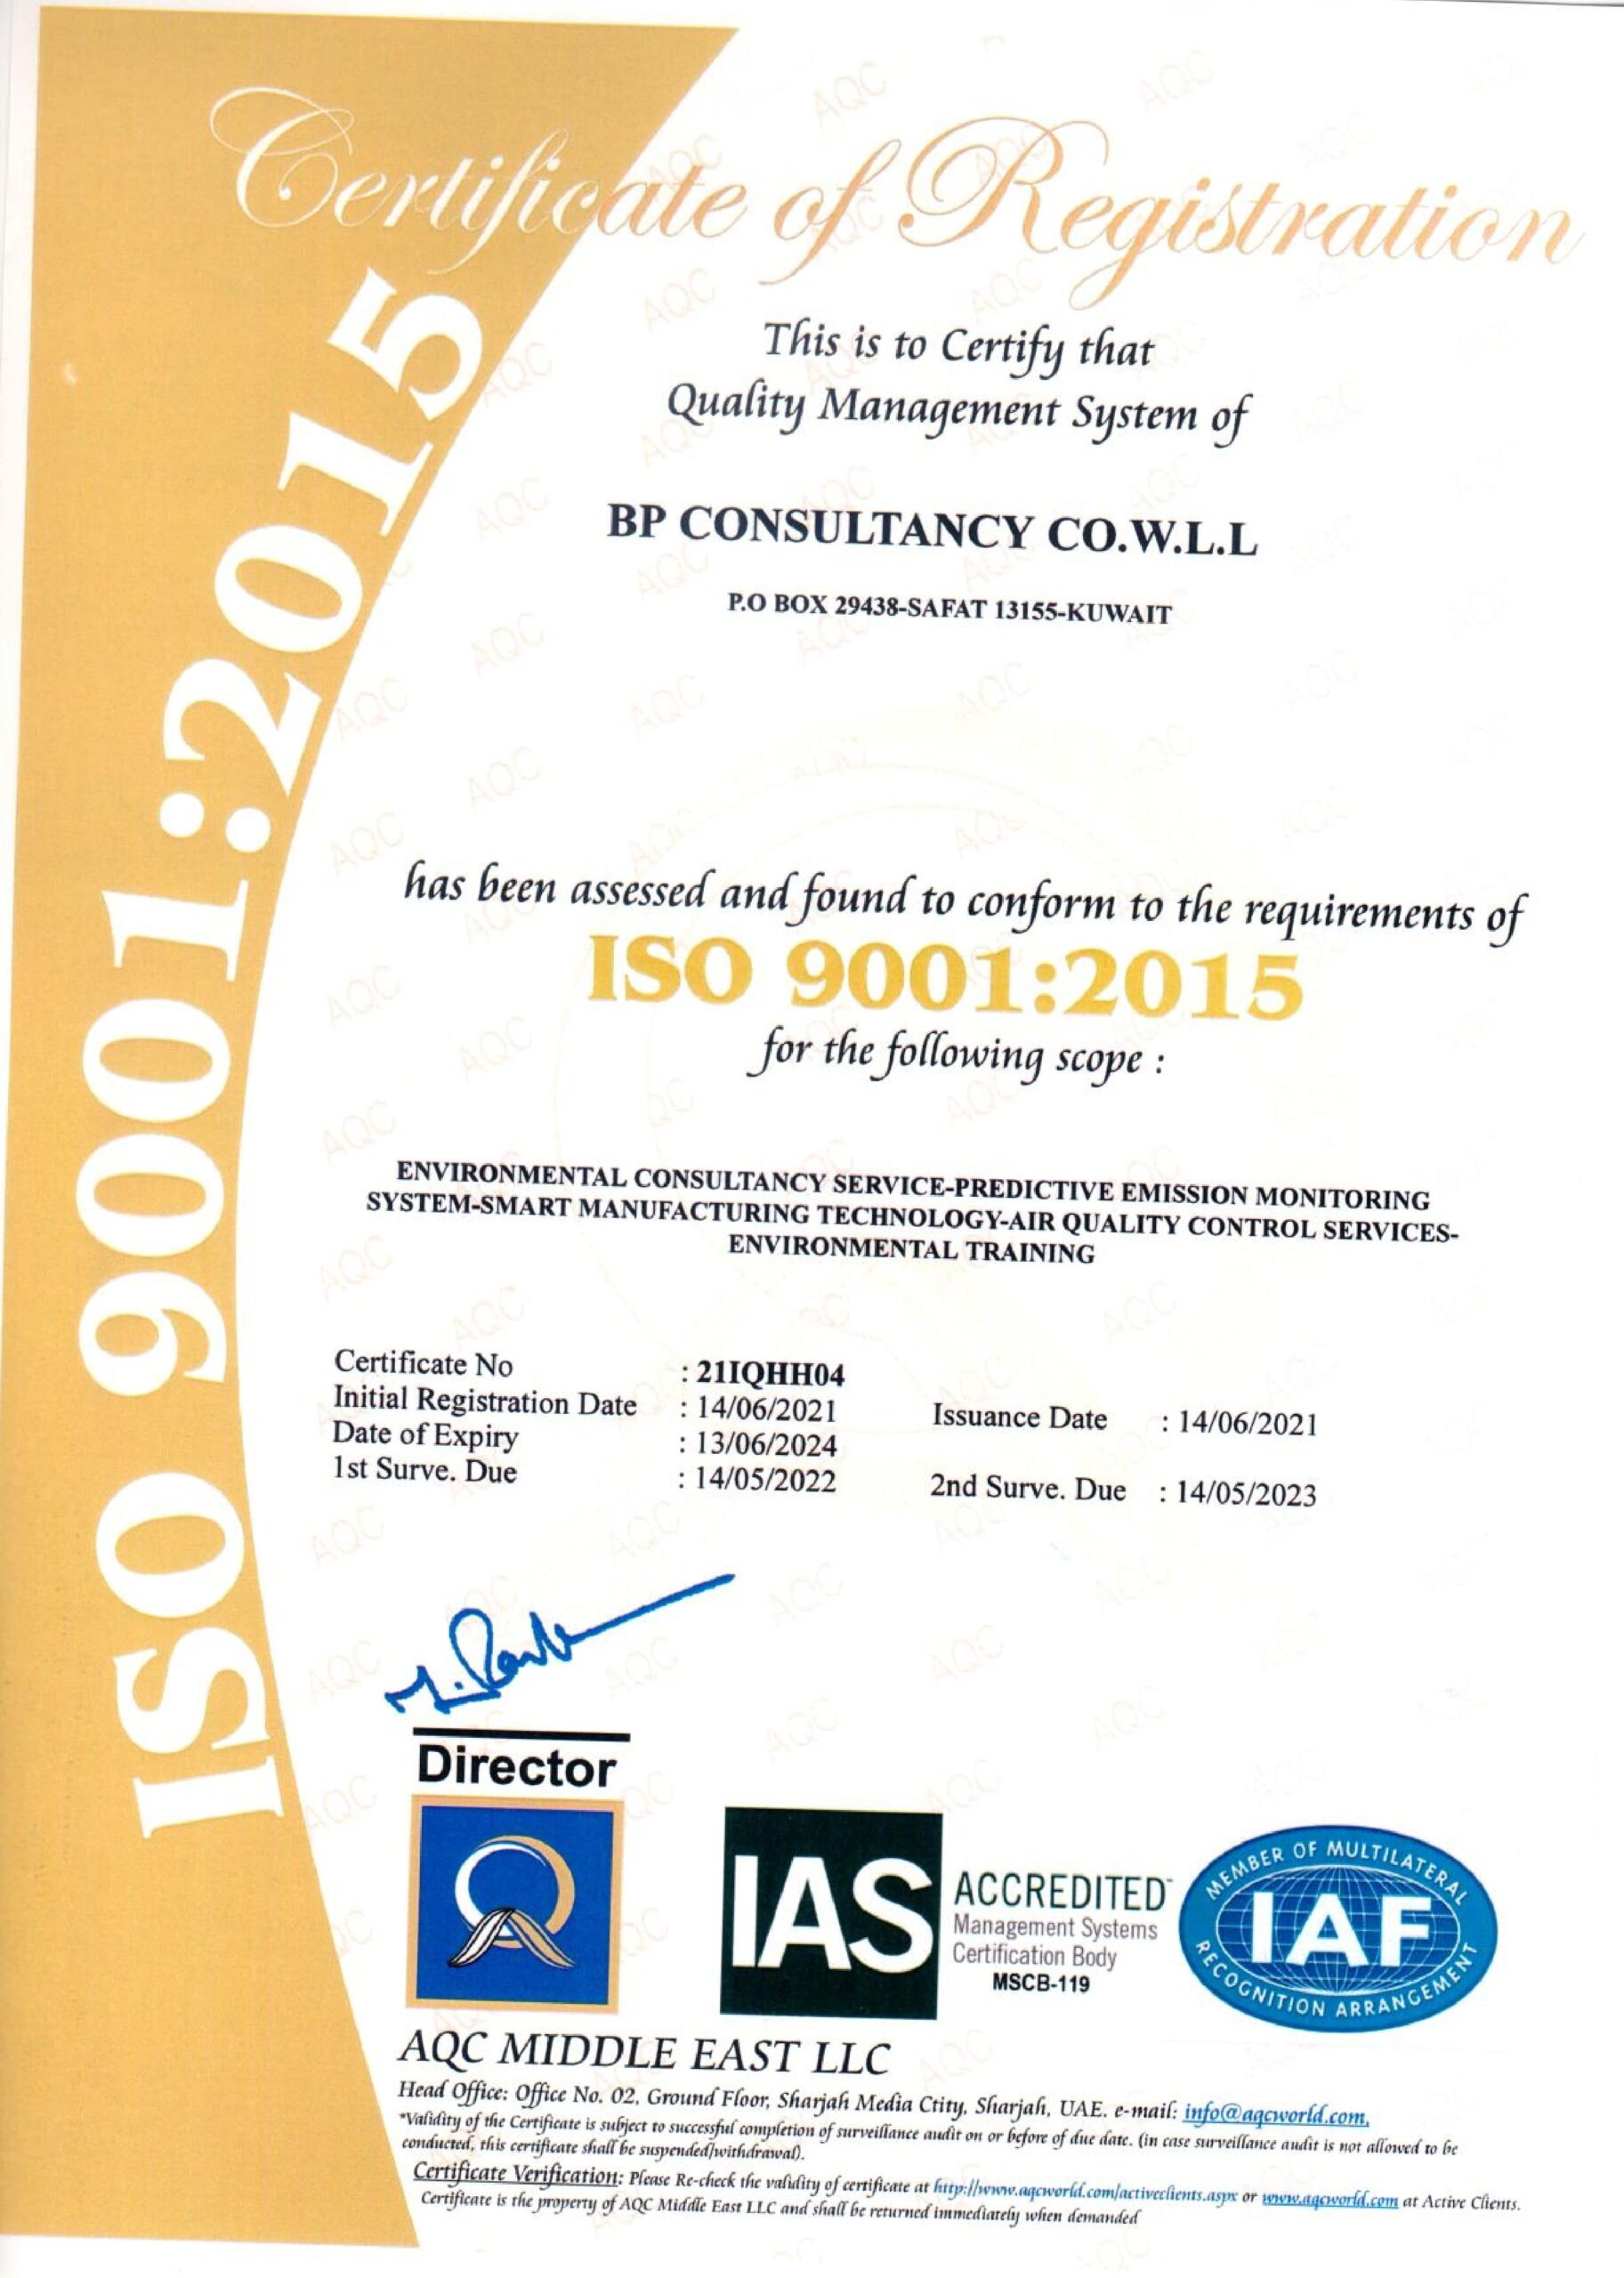 Certification to ISO 9001:2015